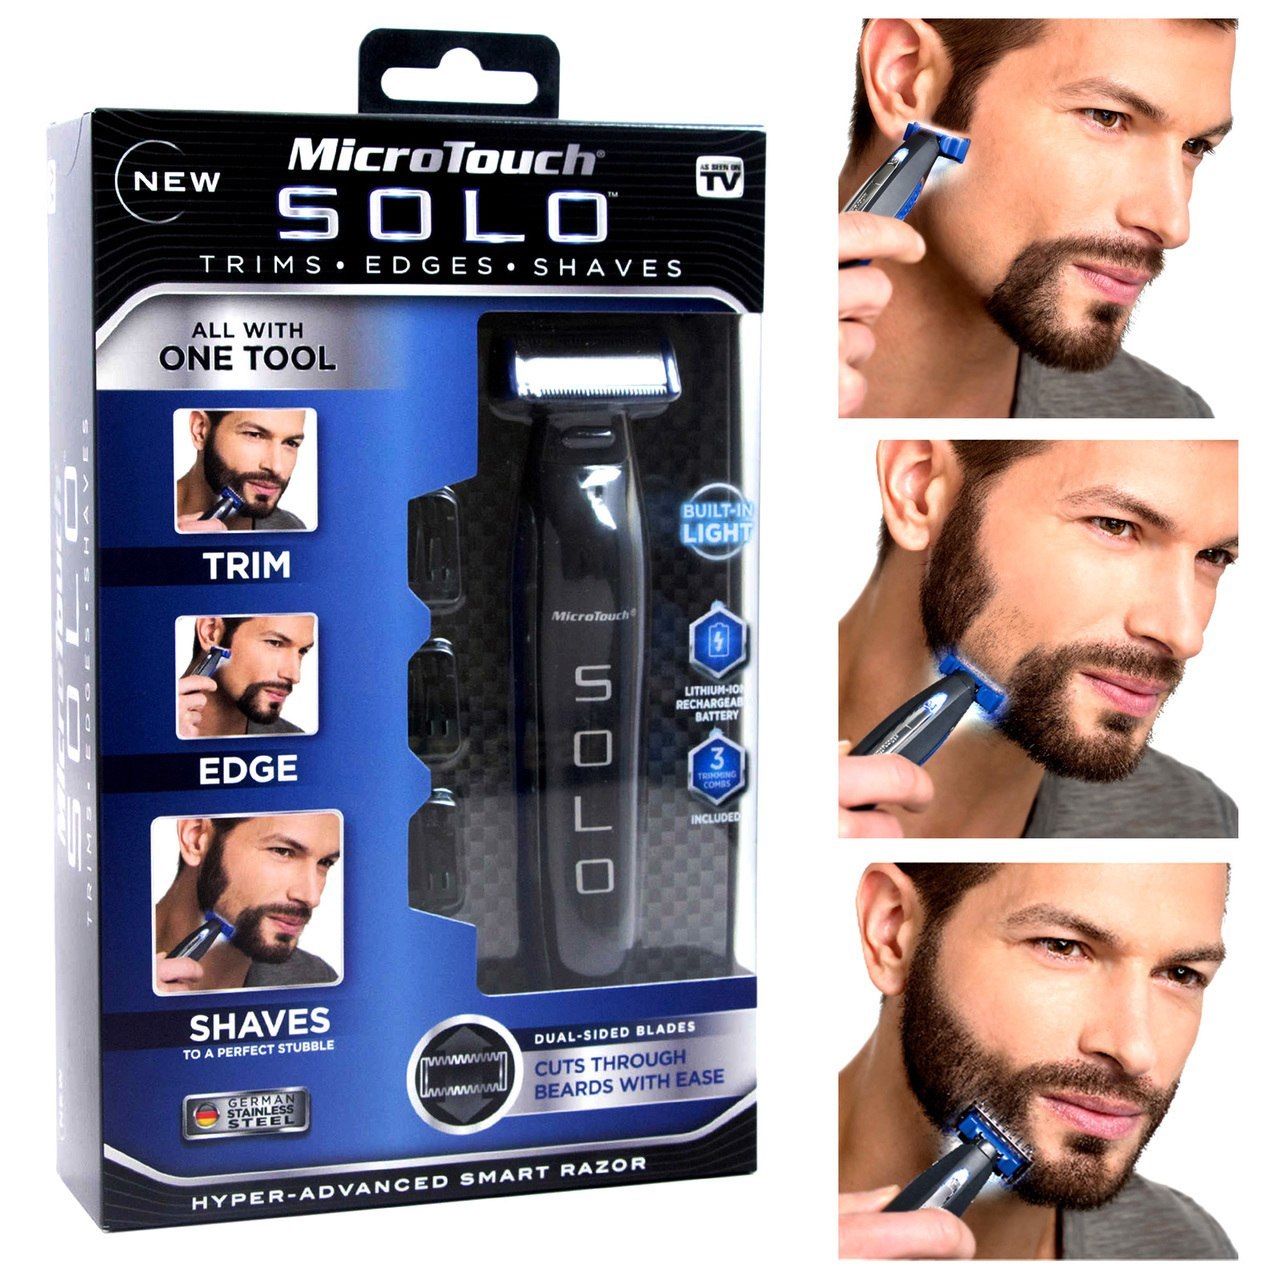 Microtouch Solo Beard Trimmer - Beard Trimmer Trims, Edges, and Shaves All In One! - image 3 of 7